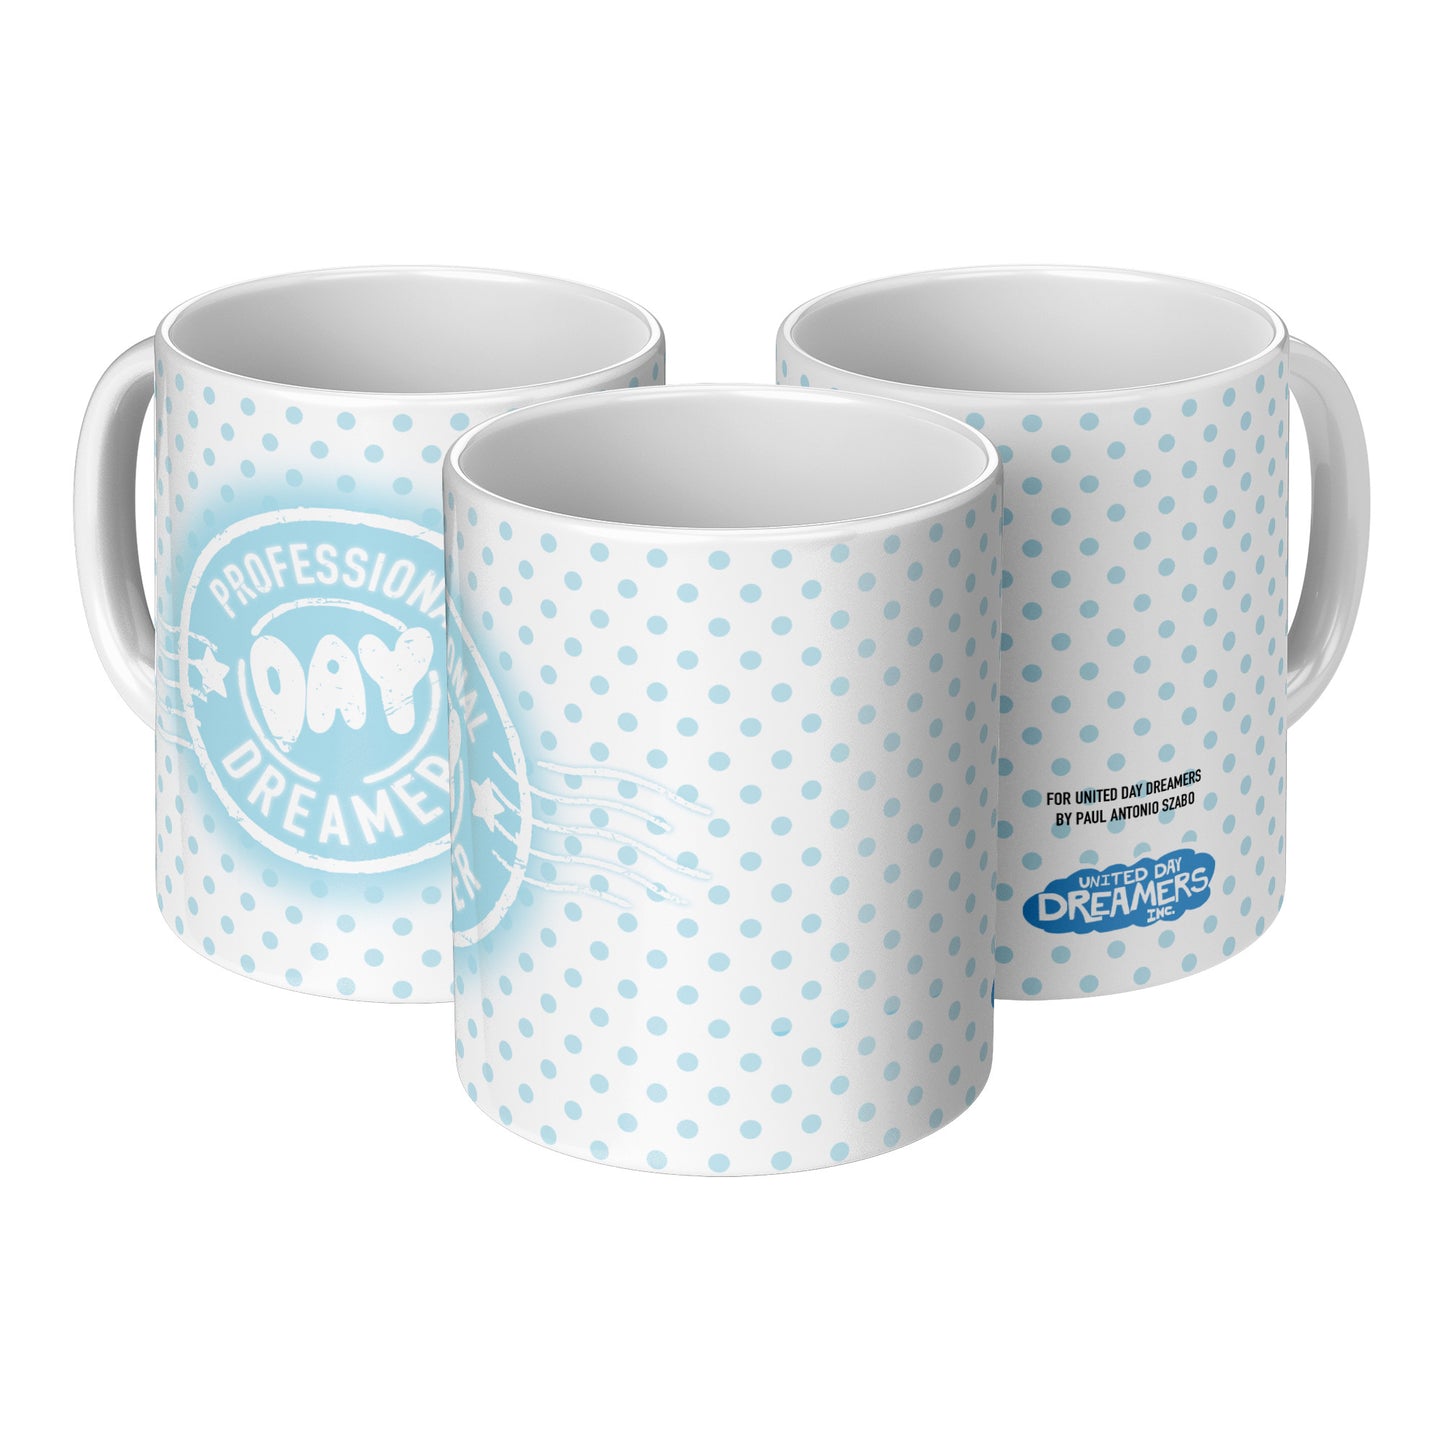 The Professional Day Dreamer Mug in Blue